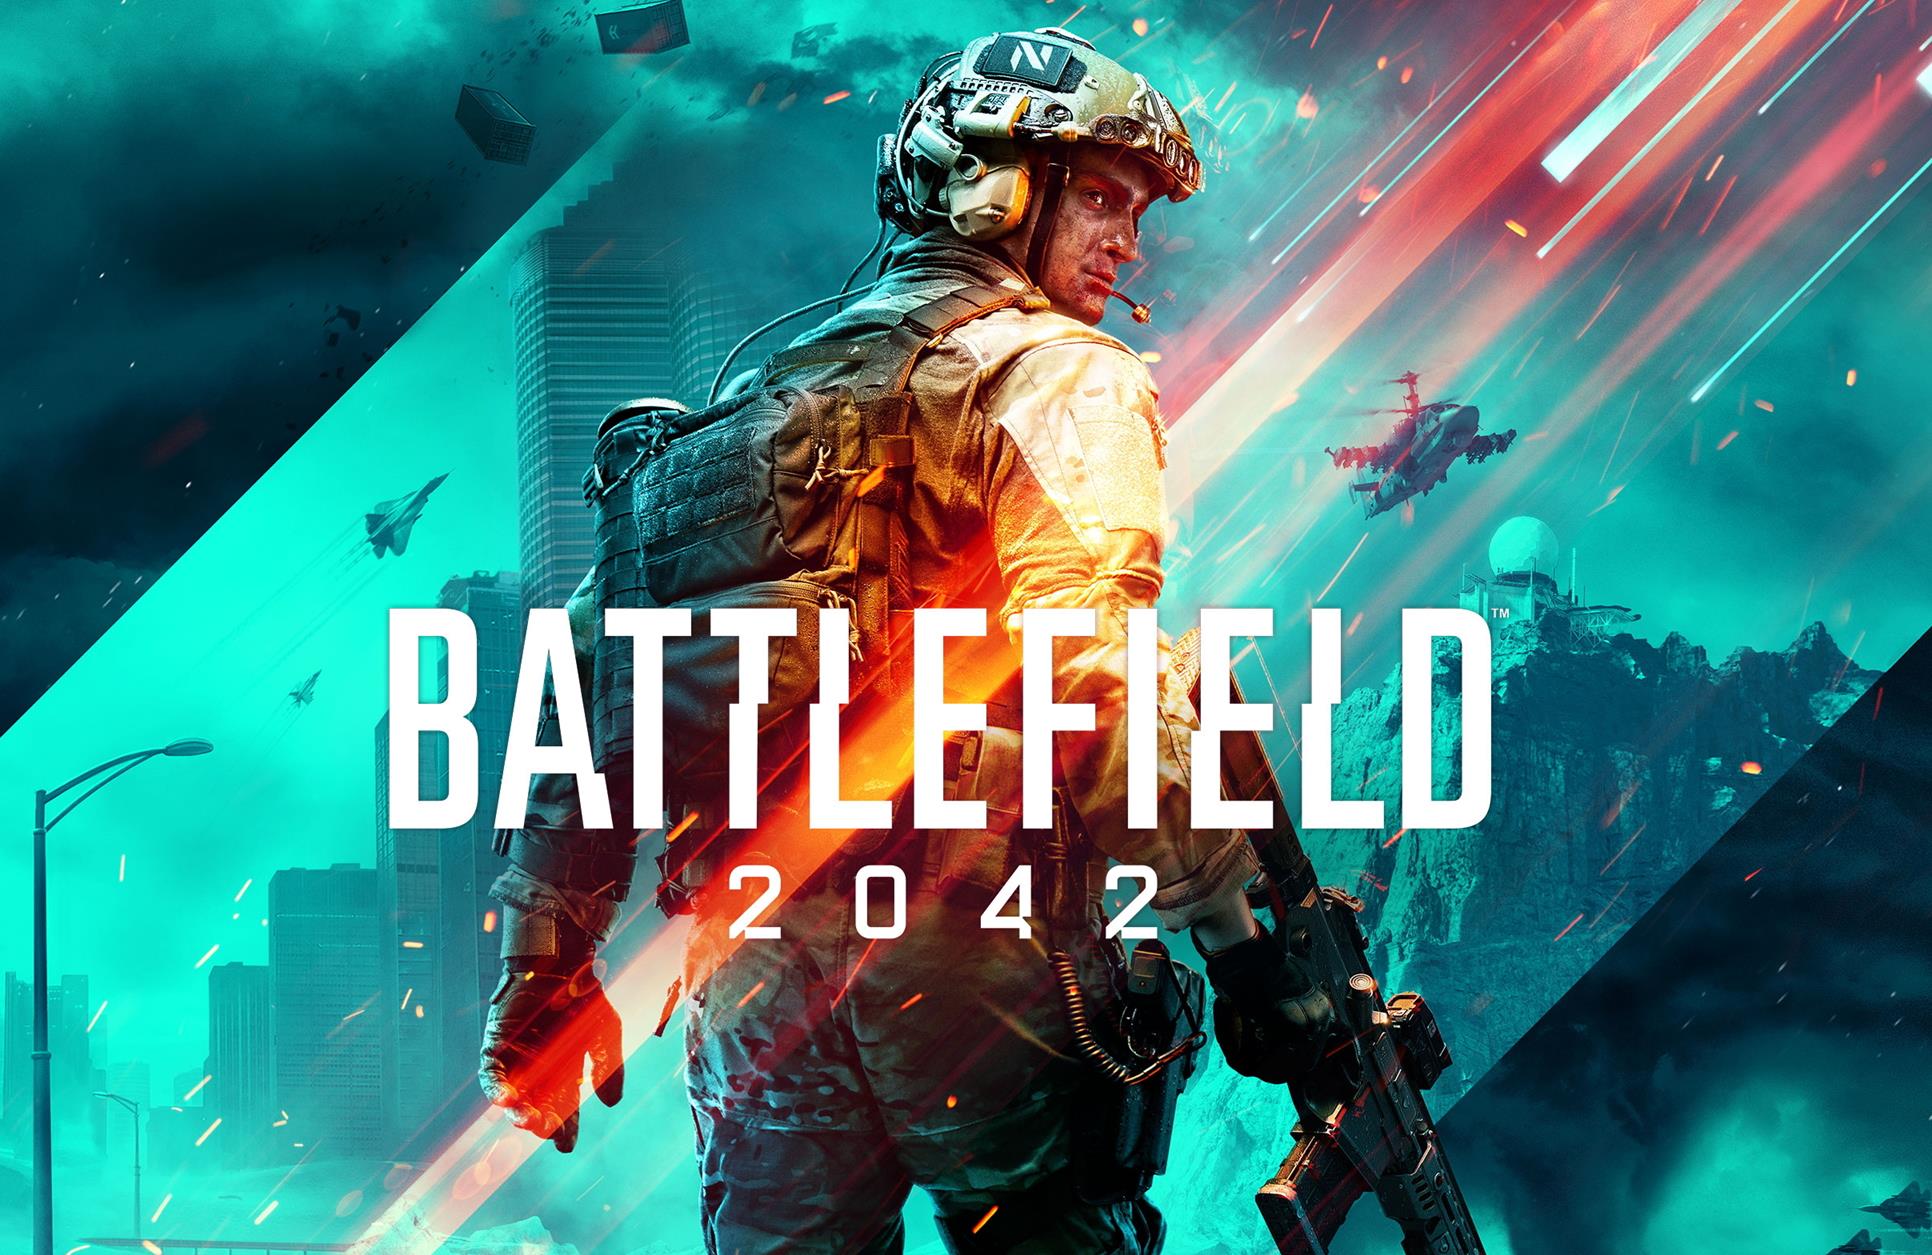 Image for Watch EA Play Live Spotlight's Future of FPS panel here for Battlefield 2042 and Apex Legends chat